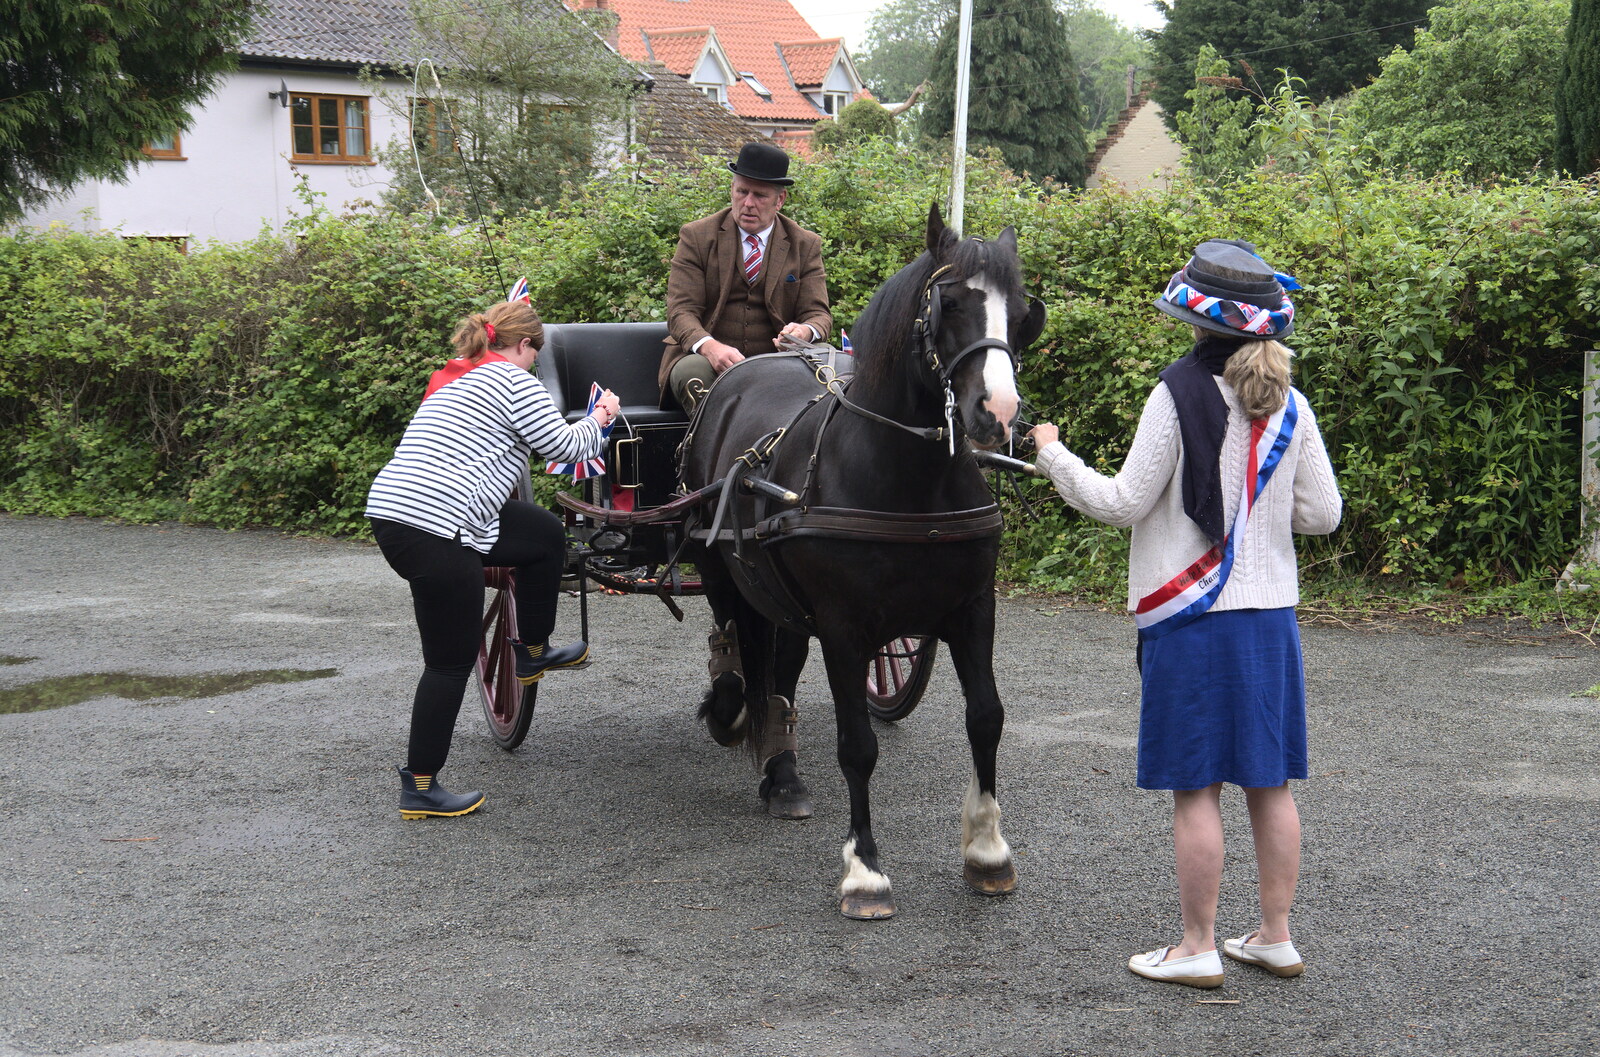 Platinum Jubilee Sunday in Palgrave, Brome and Coney Weston - 5th June 2022: Steve gets ready to head off